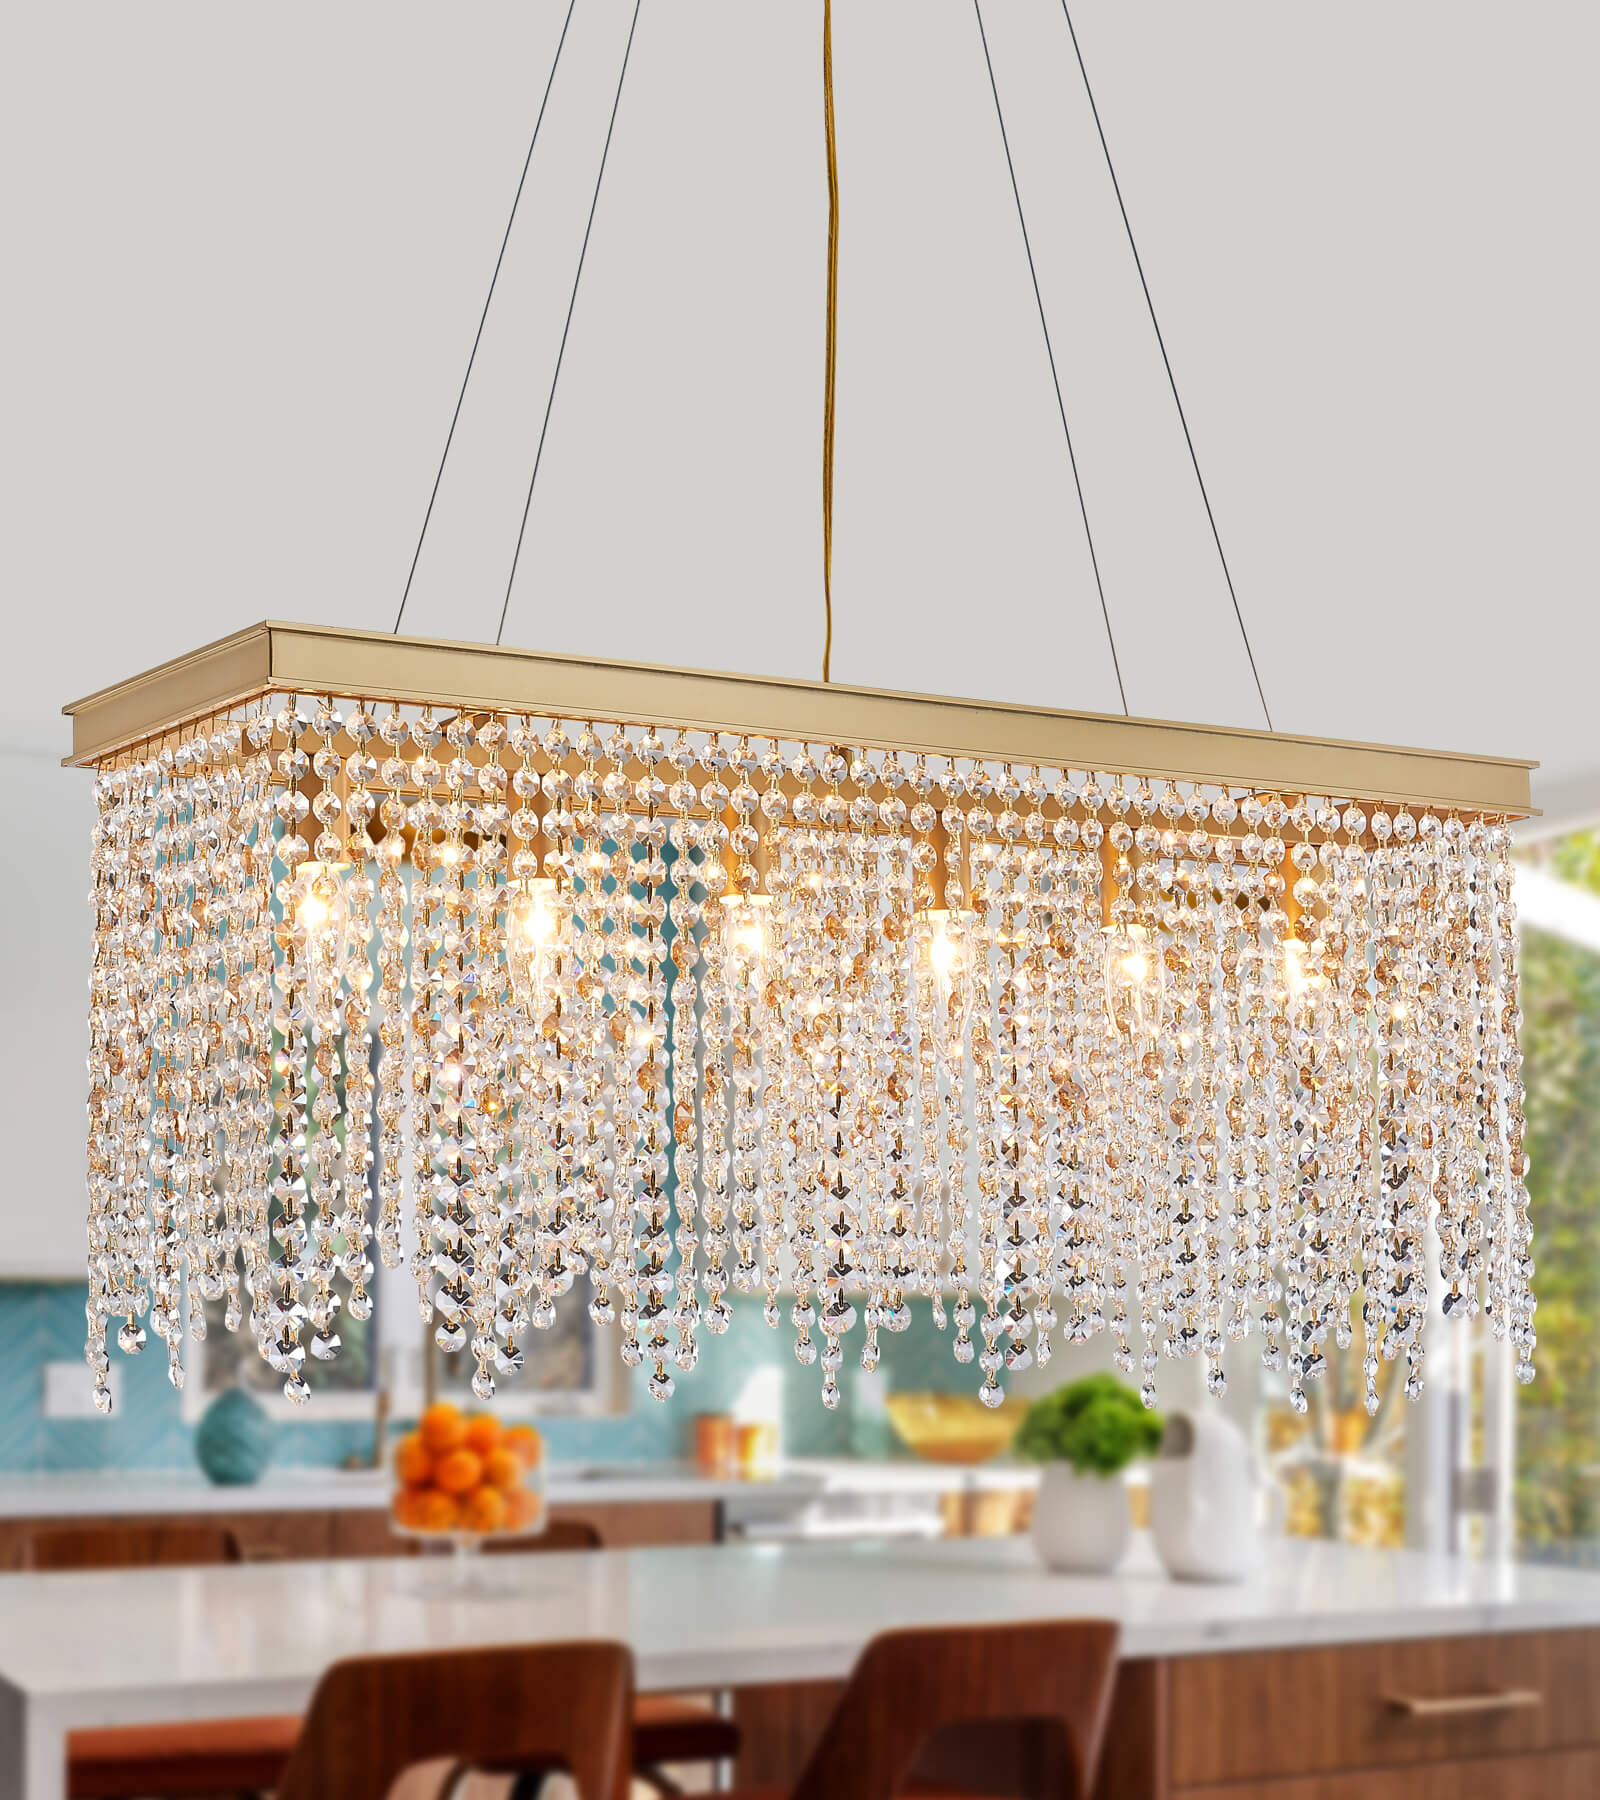 Q&S Gold Chandelier,Modern Industrial Antique Brass Square Crystal  Chandeliers 4 Lights Hanging Pendant Light Fixture for Dining Room Hallway  Entryway